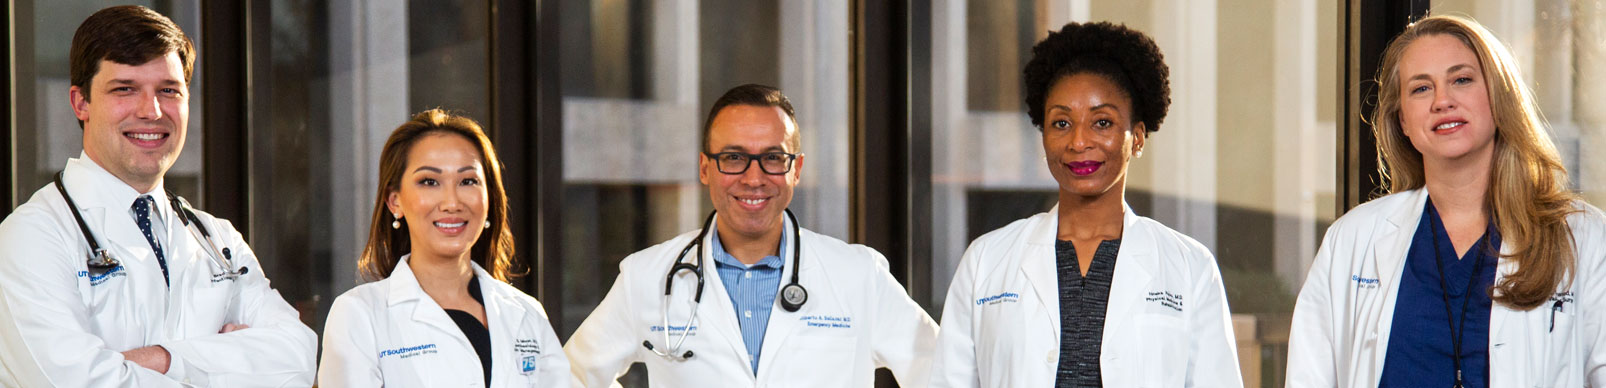 4 medical professionals stand side by side in white coats